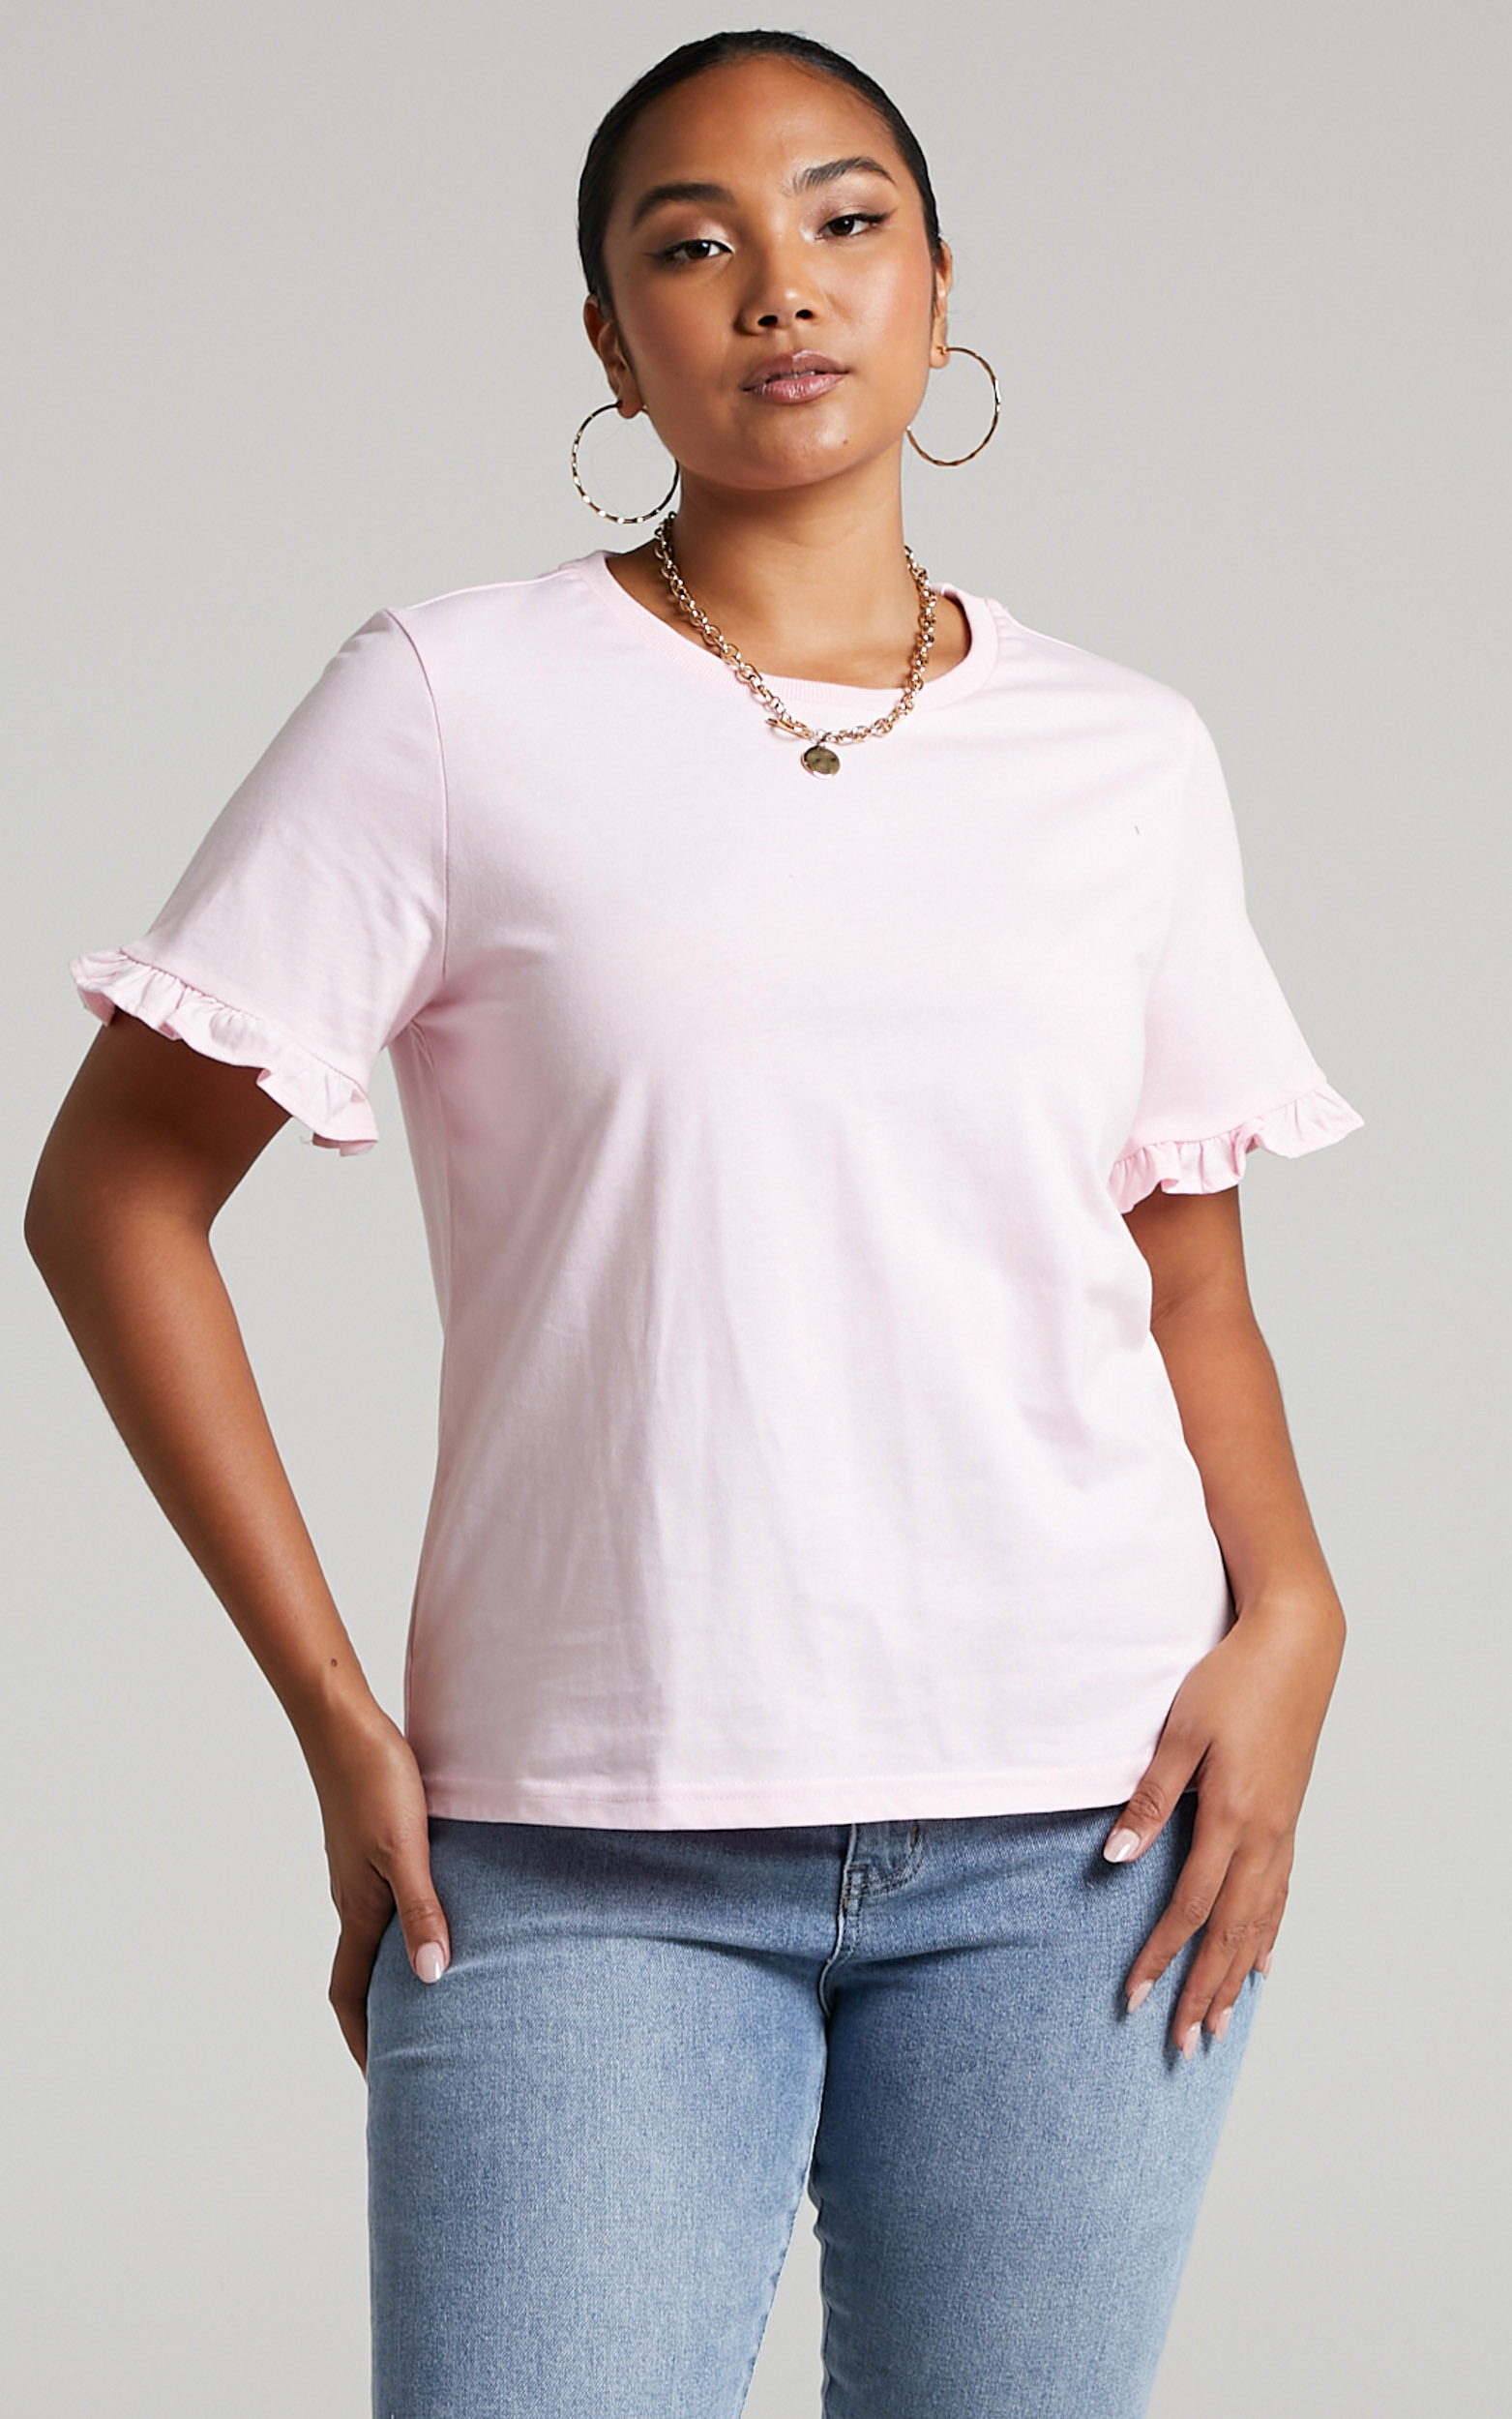 Closer To Home Ruffle Sleeve Tee in Pale Pink - 04, PNK2, hi-res image number null